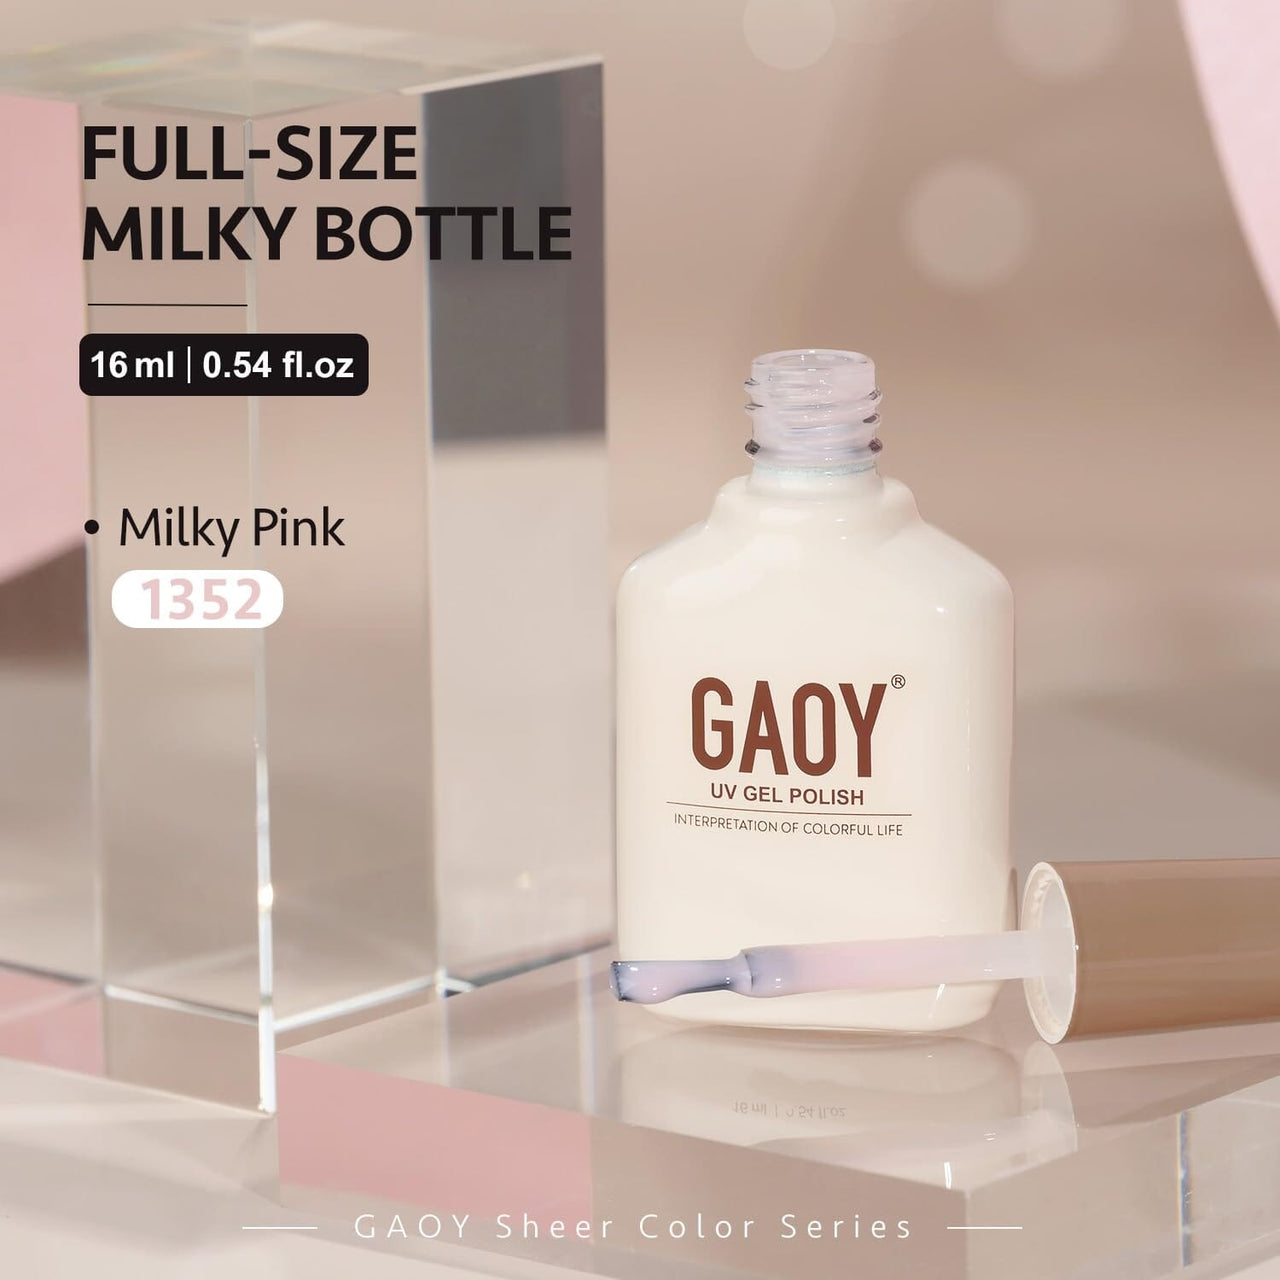 GAOY GAOY Sheer Light Pink Gel Nail Polish, 16ml Jelly Milky White Peach Translucent Color 1352 UV Light Cure Gel Polish for Nail Art DIY Manicure and Pedicure at Home